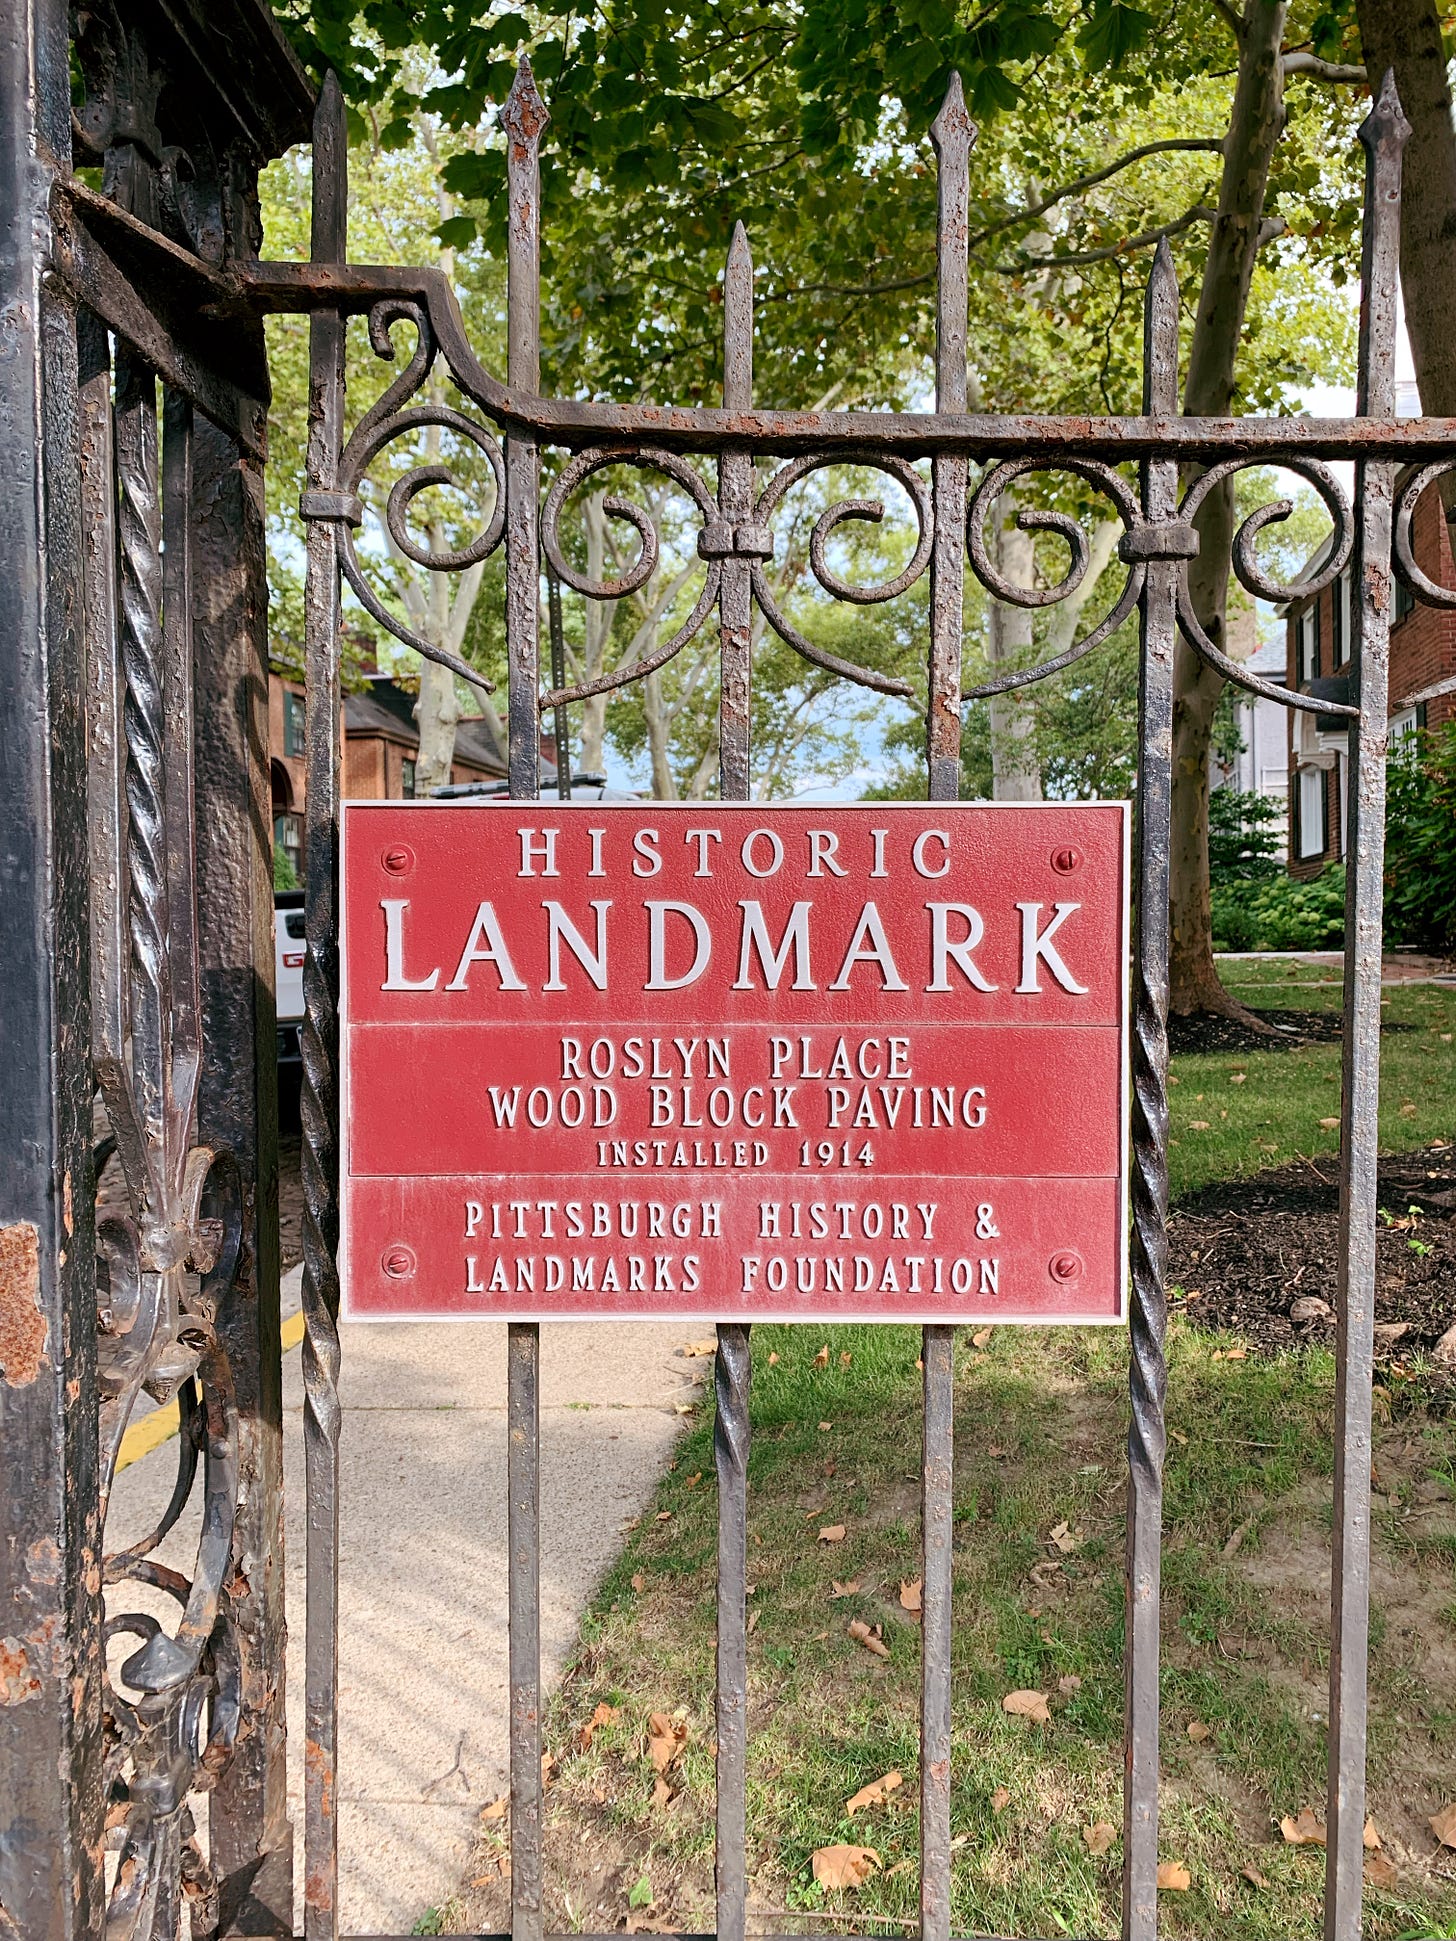 Historic Landmark plaque at Roslyn Place